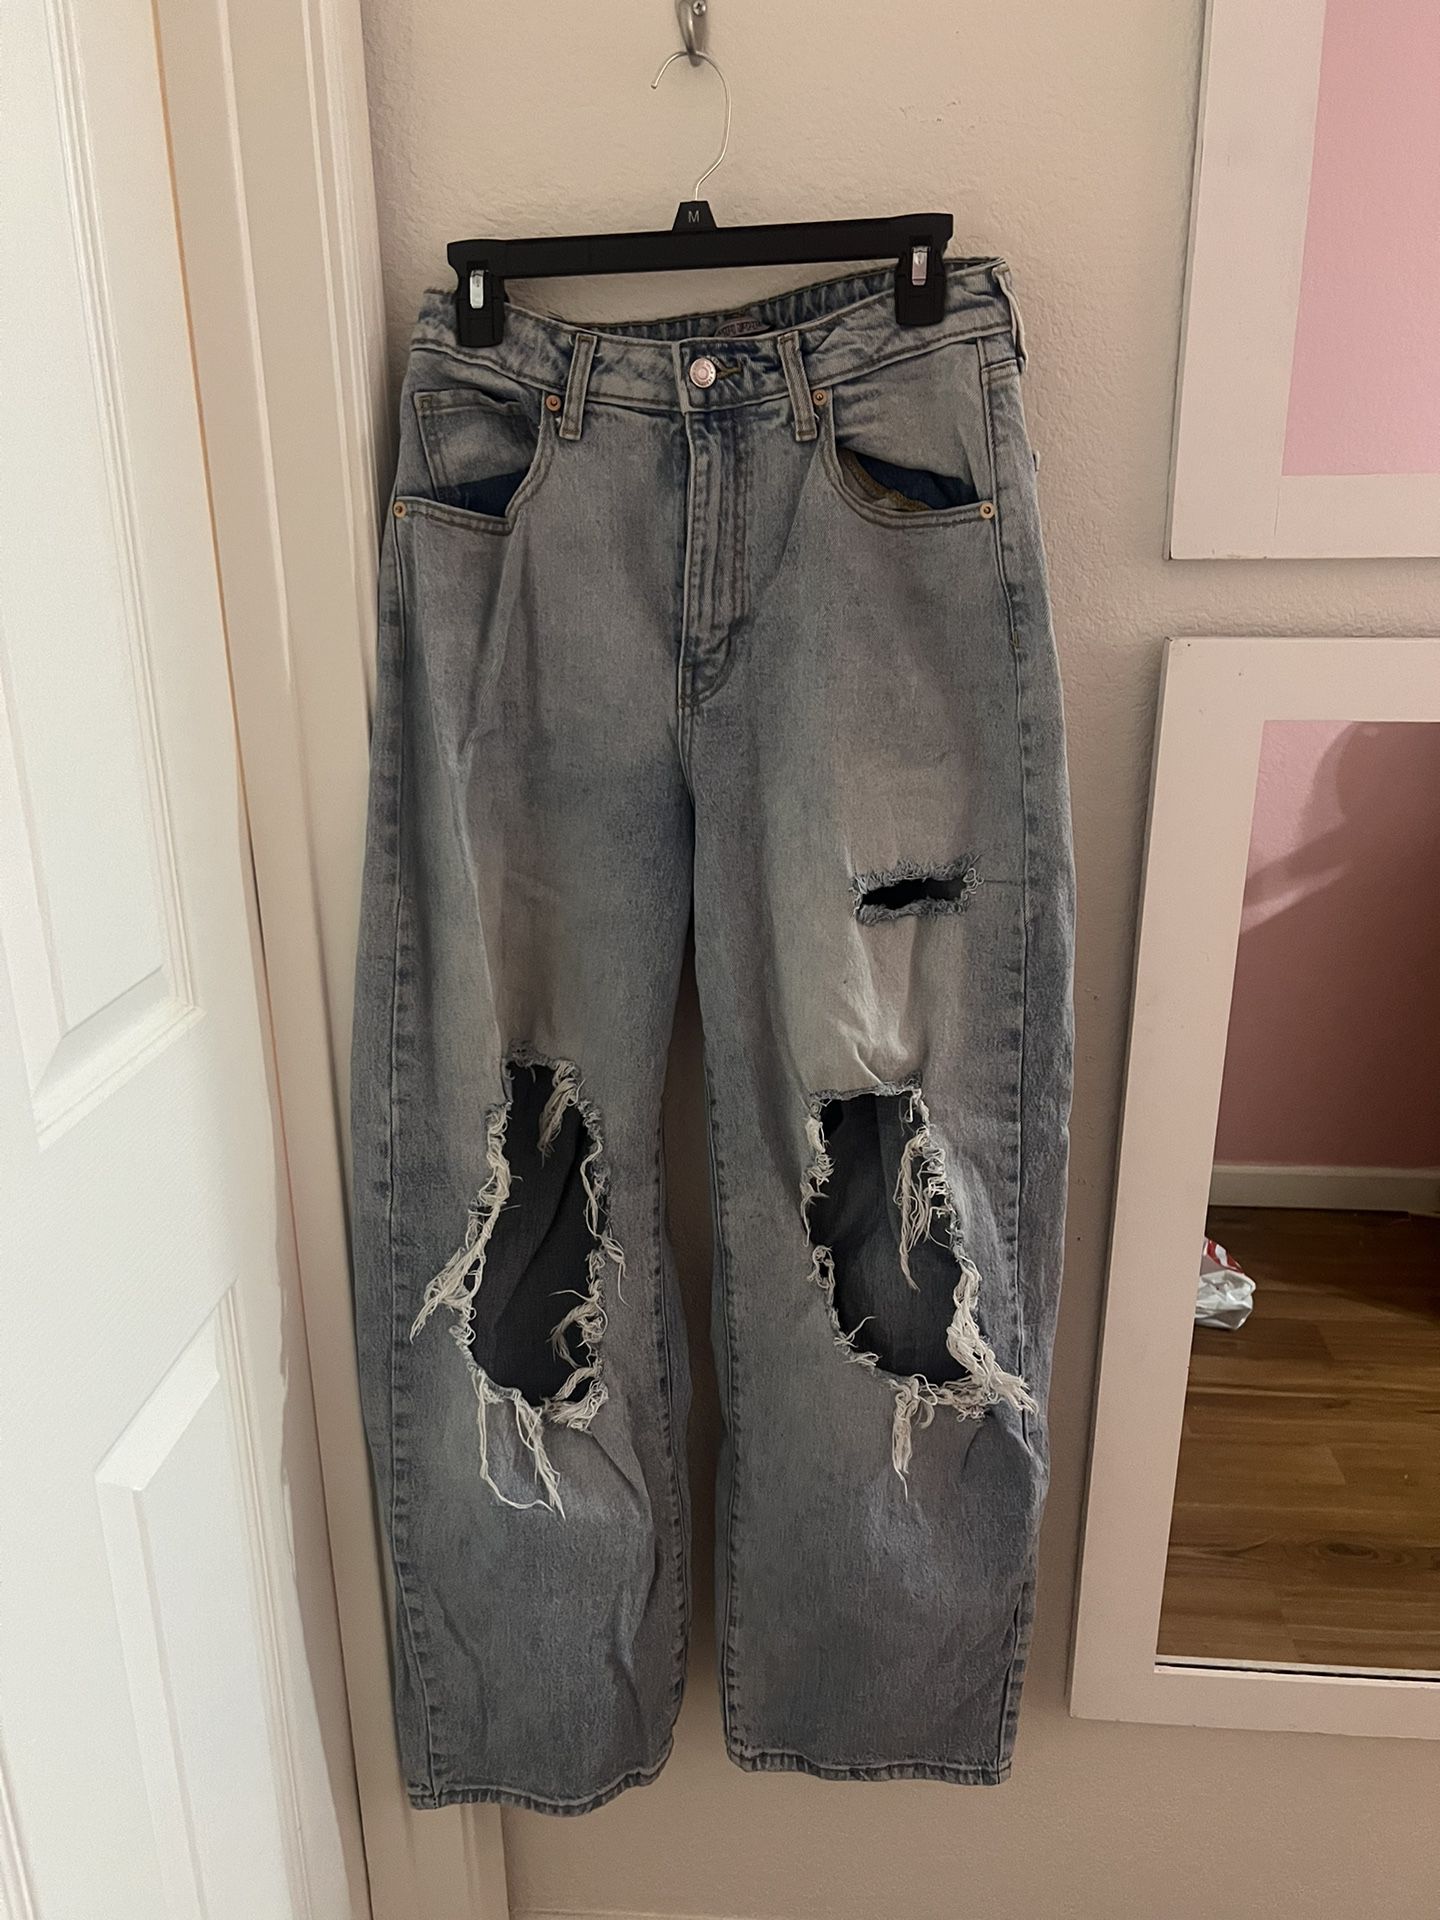 Target Highest Rise Baggy Jean Size 8/29